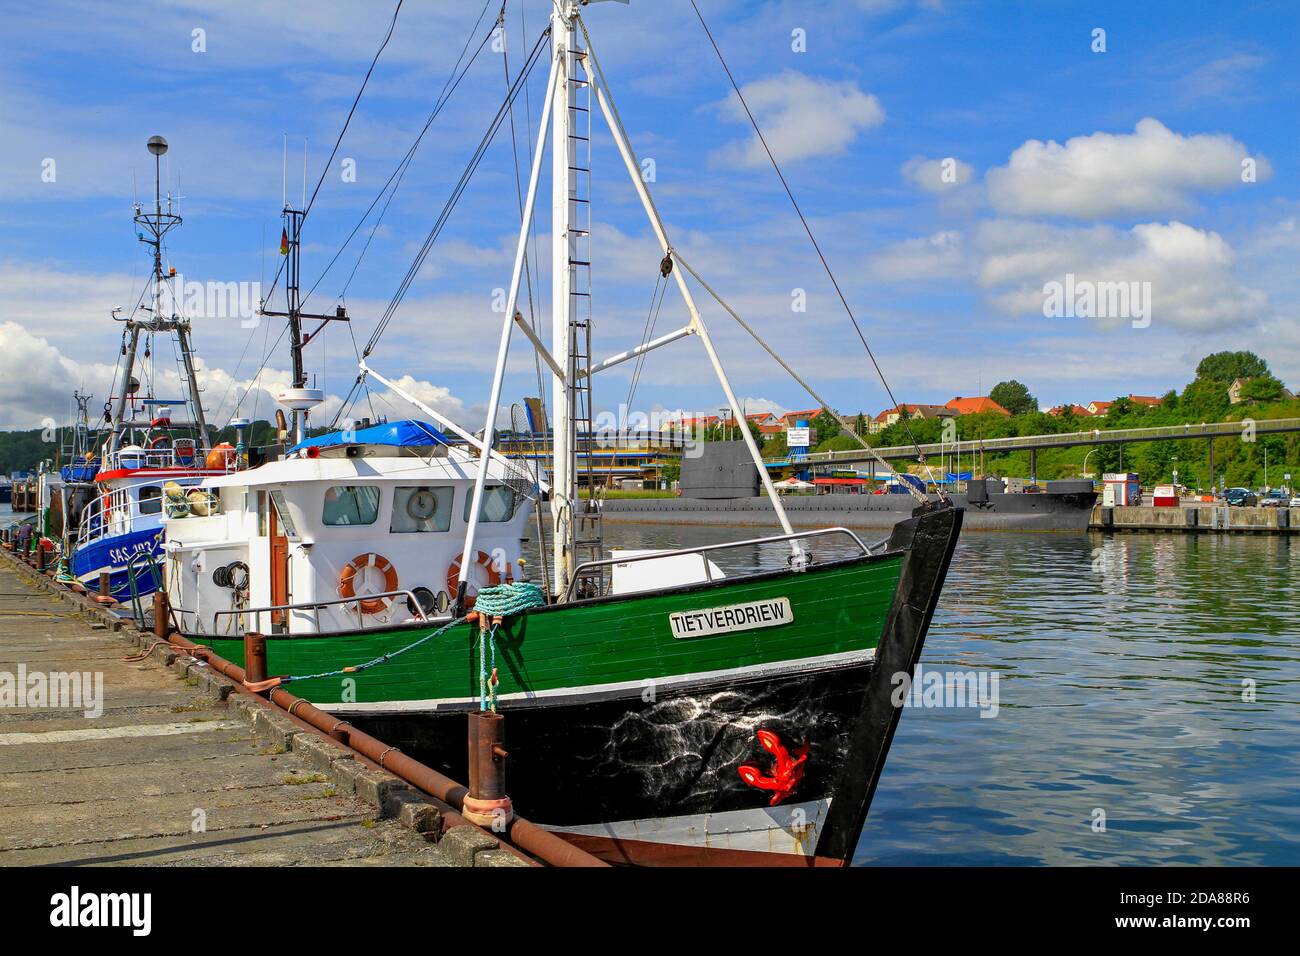 Fishing cutter and U-boat in the harbour, Sassnitz, Ruegen Island, Mecklenburg-Western Pomerania, Germany, Europe Stock Photo